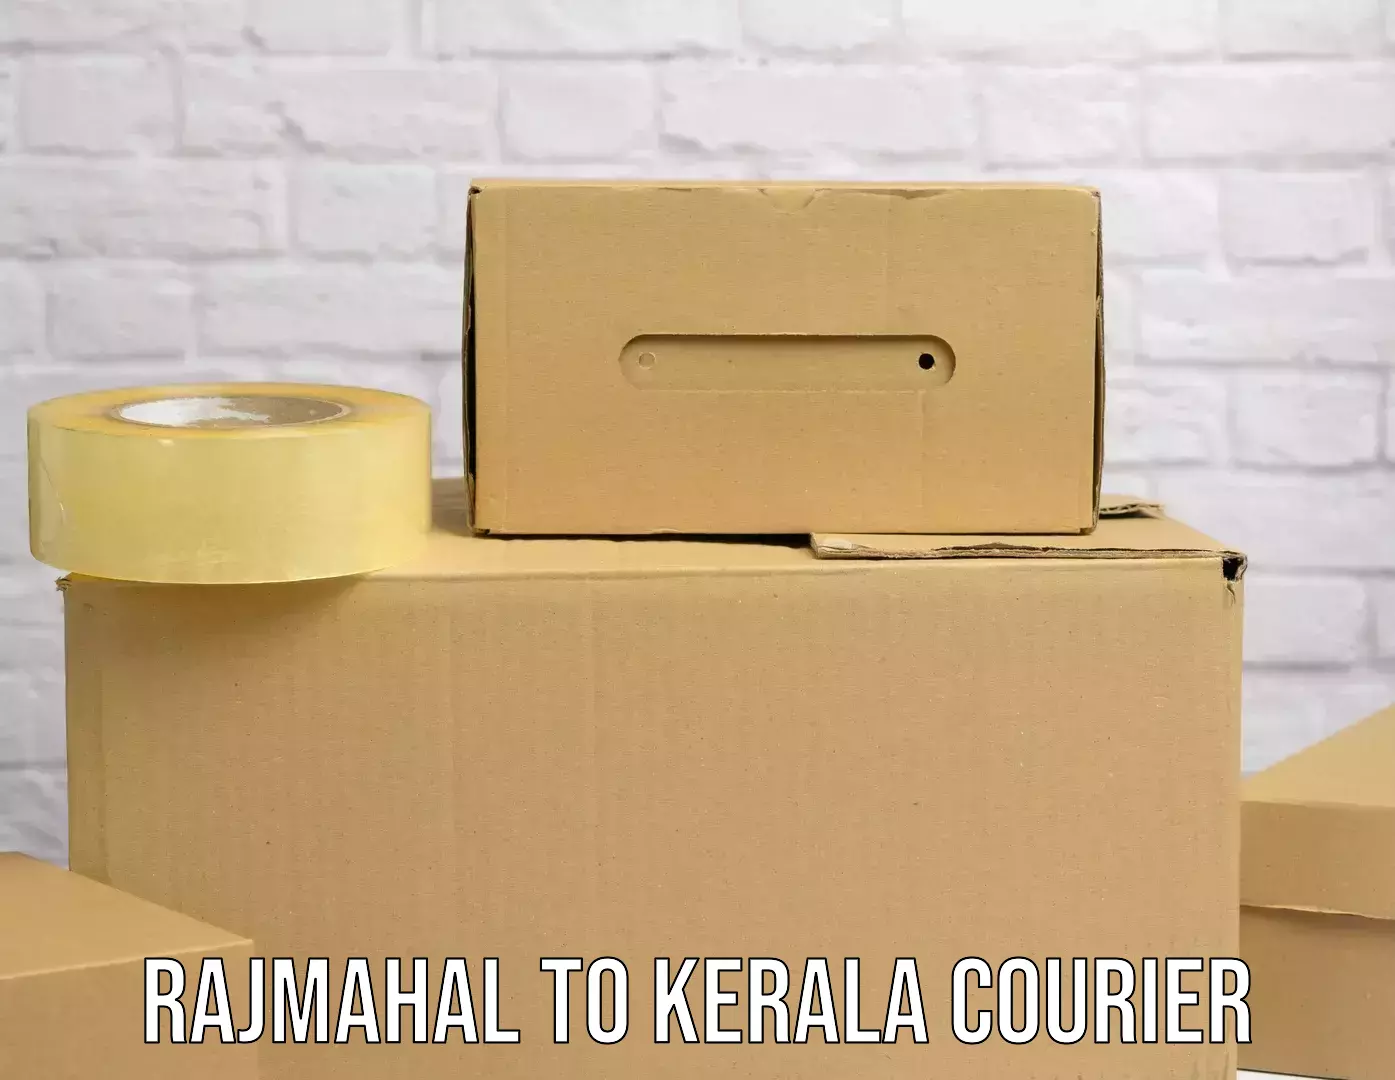 Cost-effective courier options Rajmahal to Cochin Port Kochi